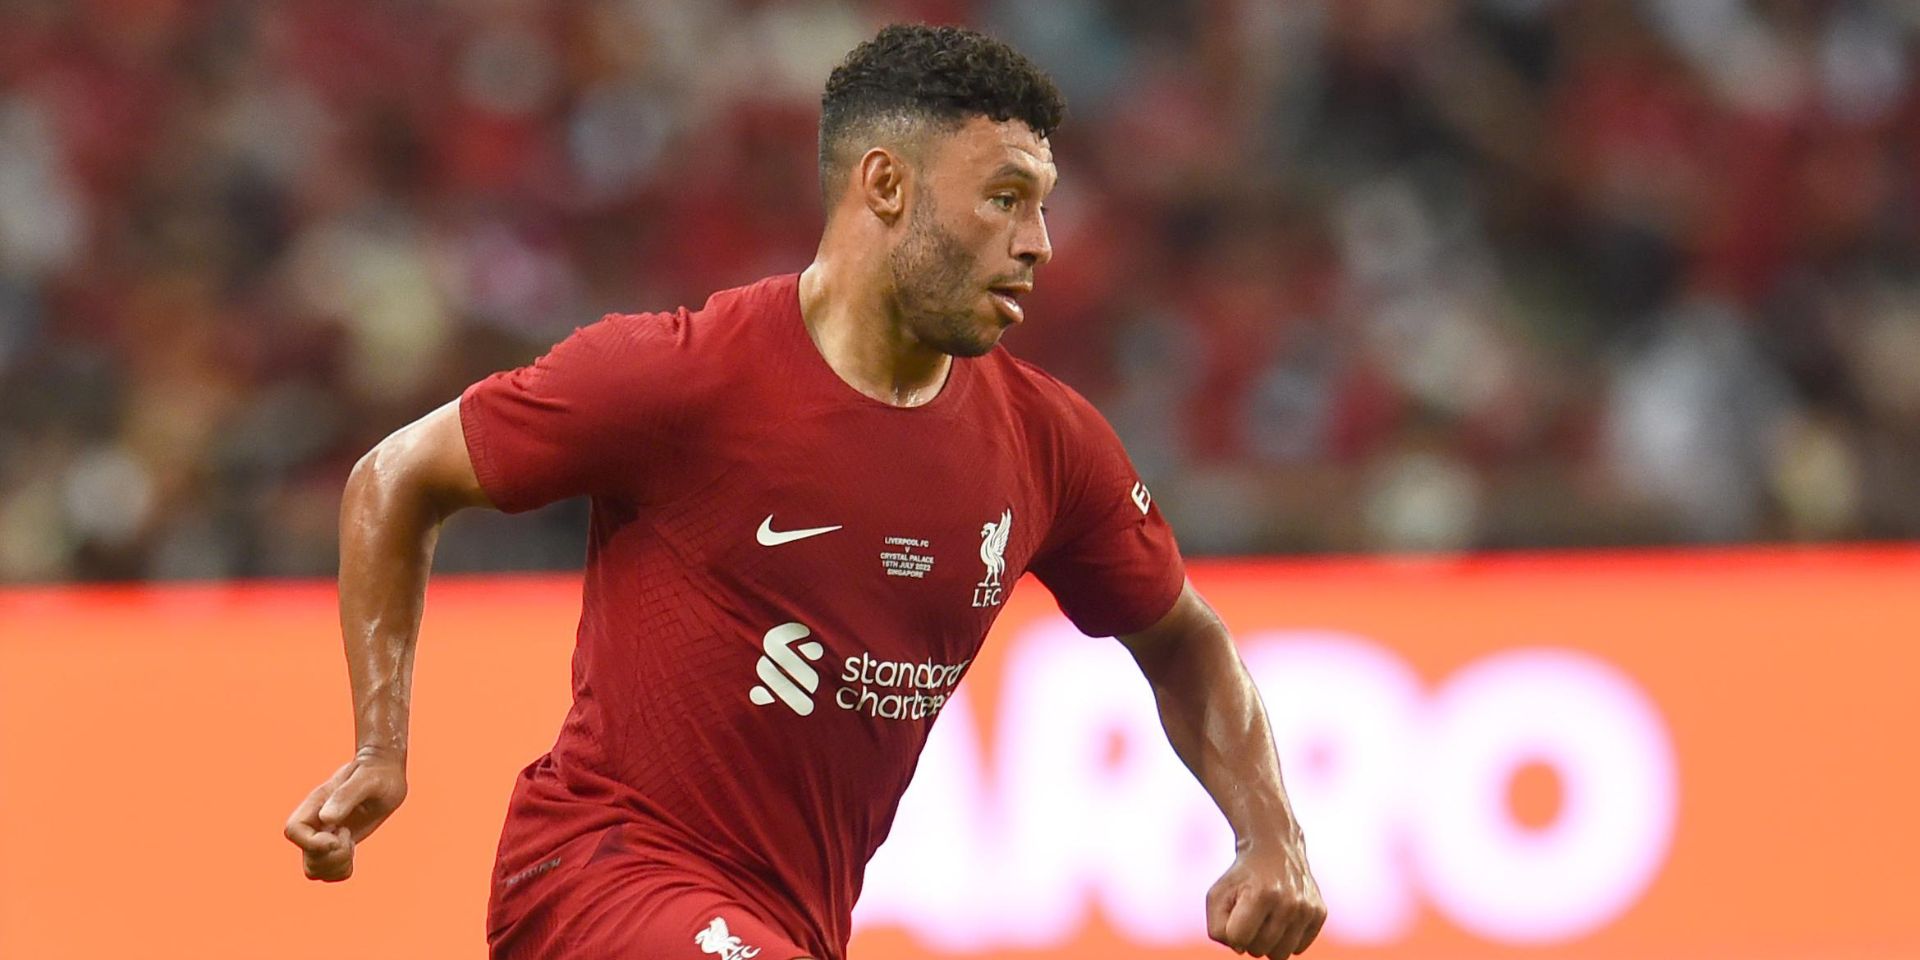 West Ham United had made a ‘soft enquiry’ for Alex Oxlade-Chamberlain as he enters the final year of his deal